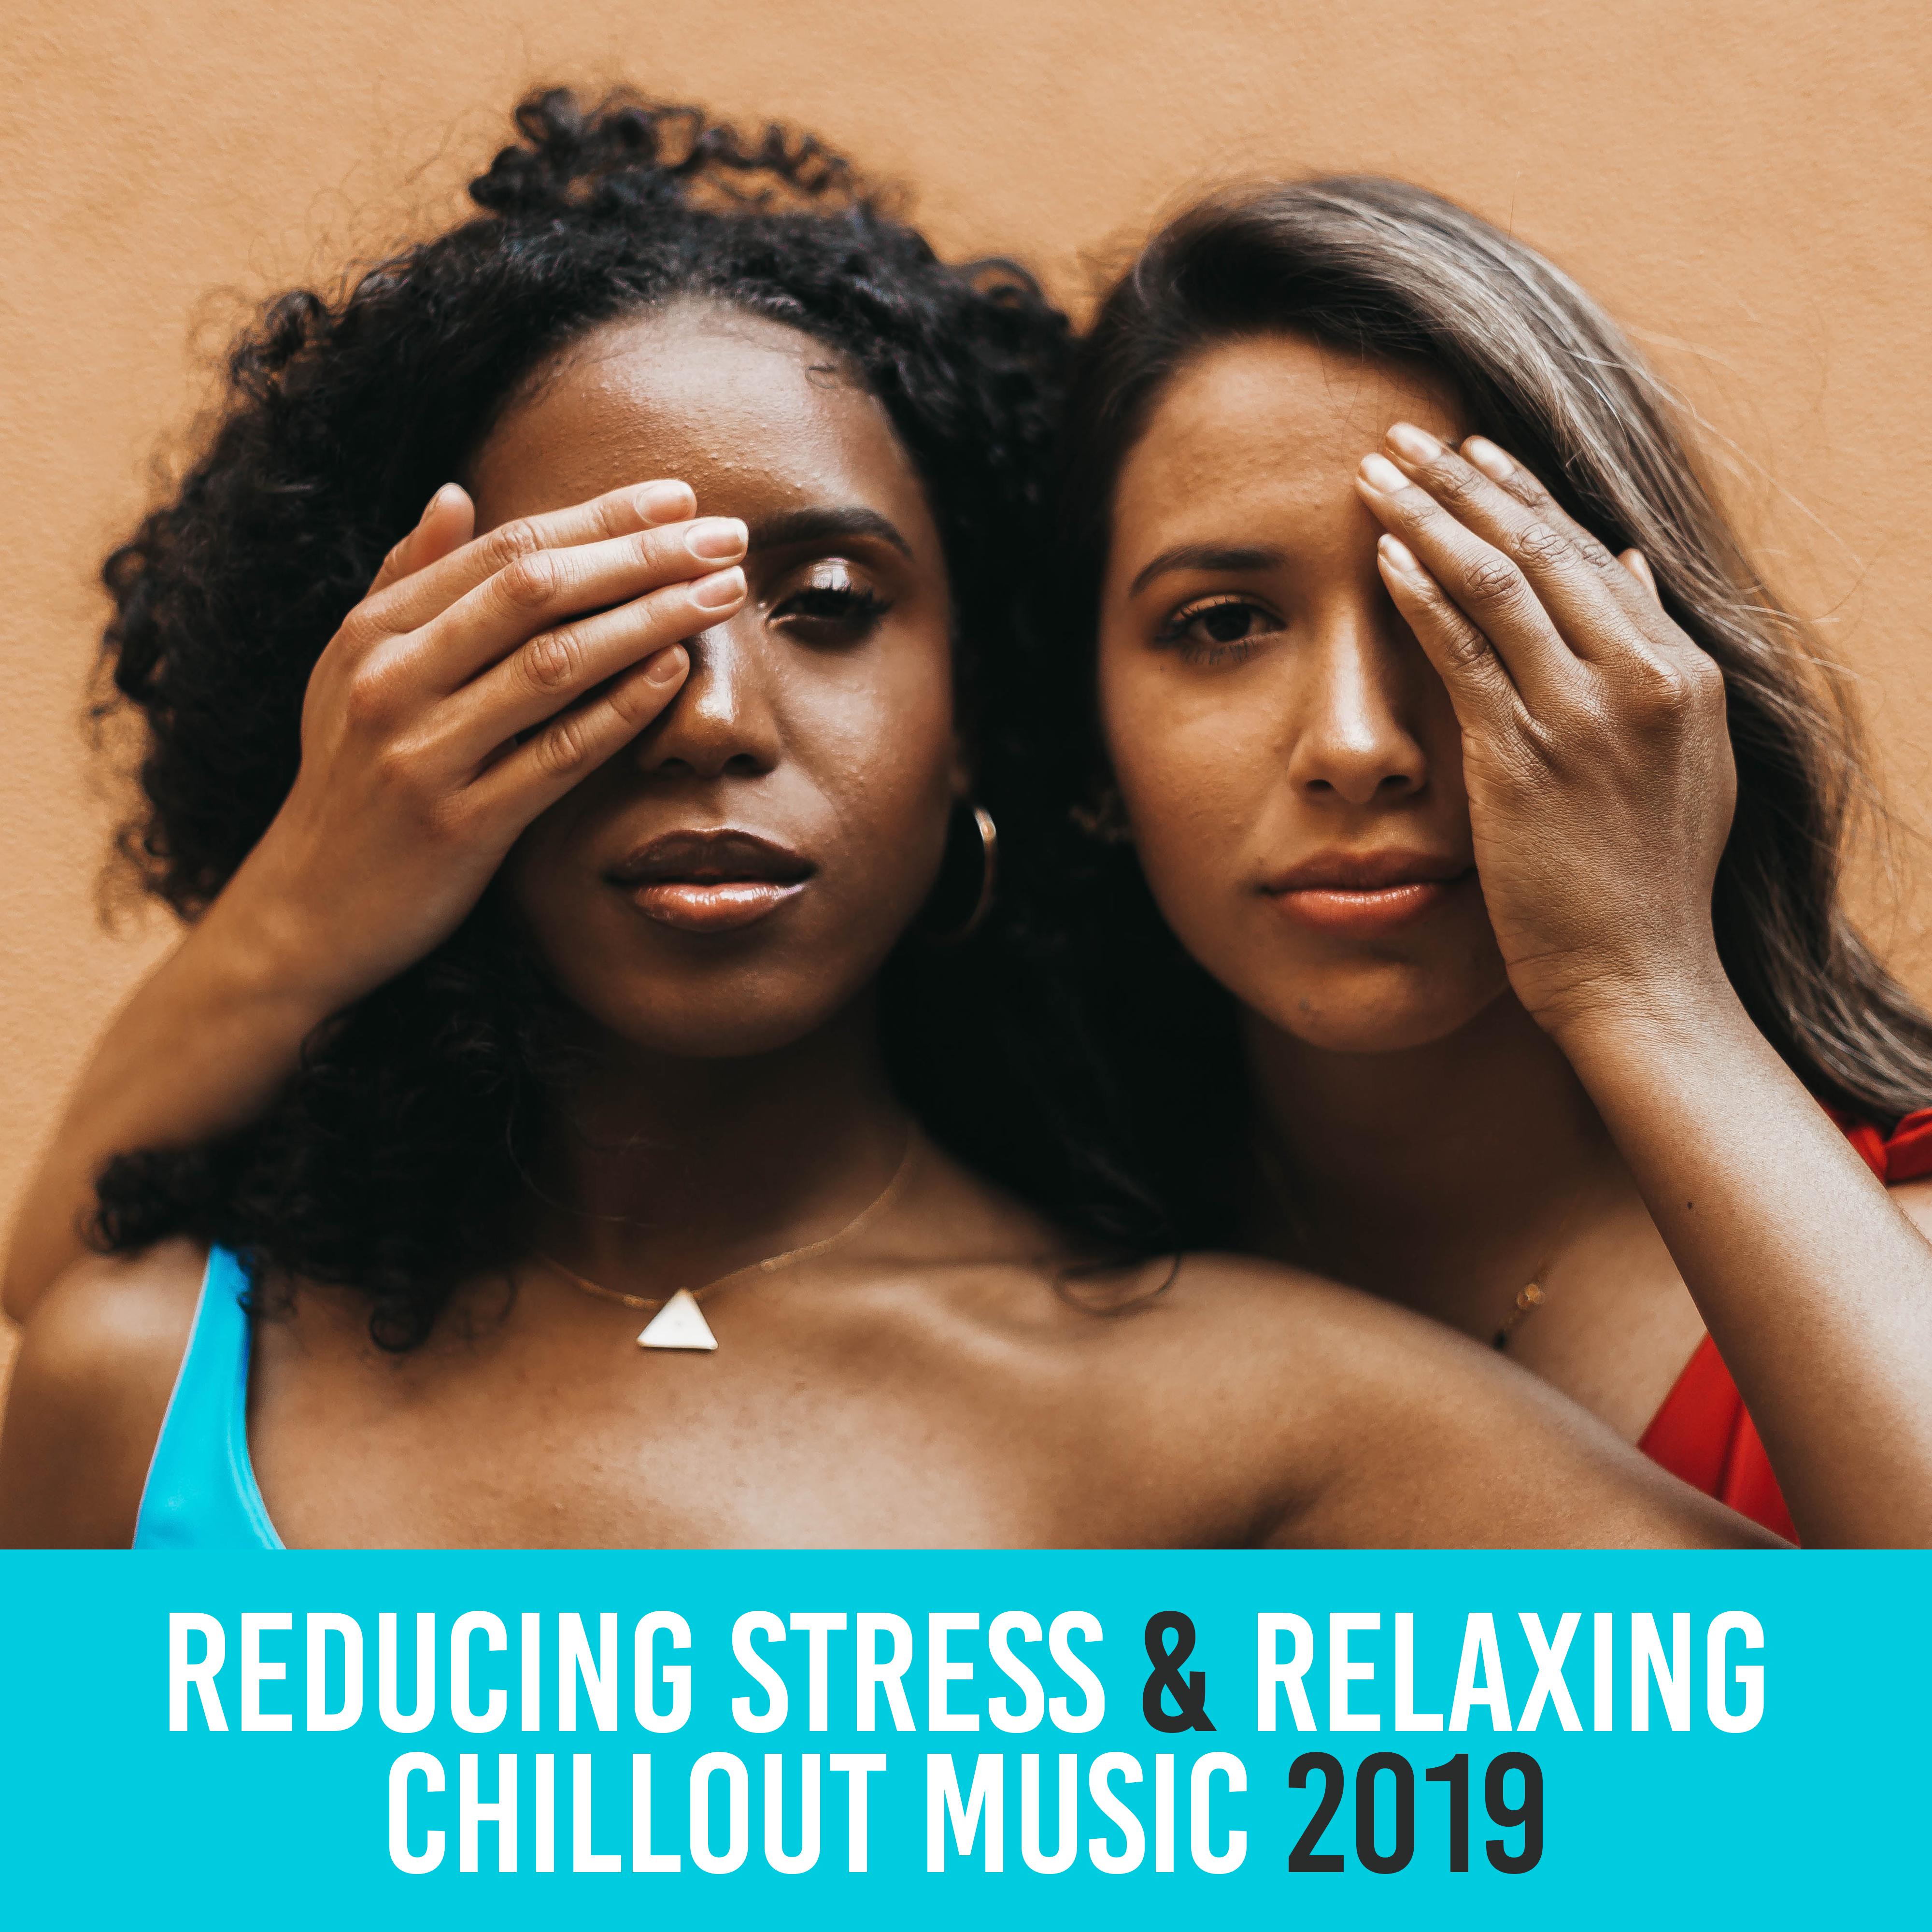 Reducing Stress & Relaxing Chillout Music 2019